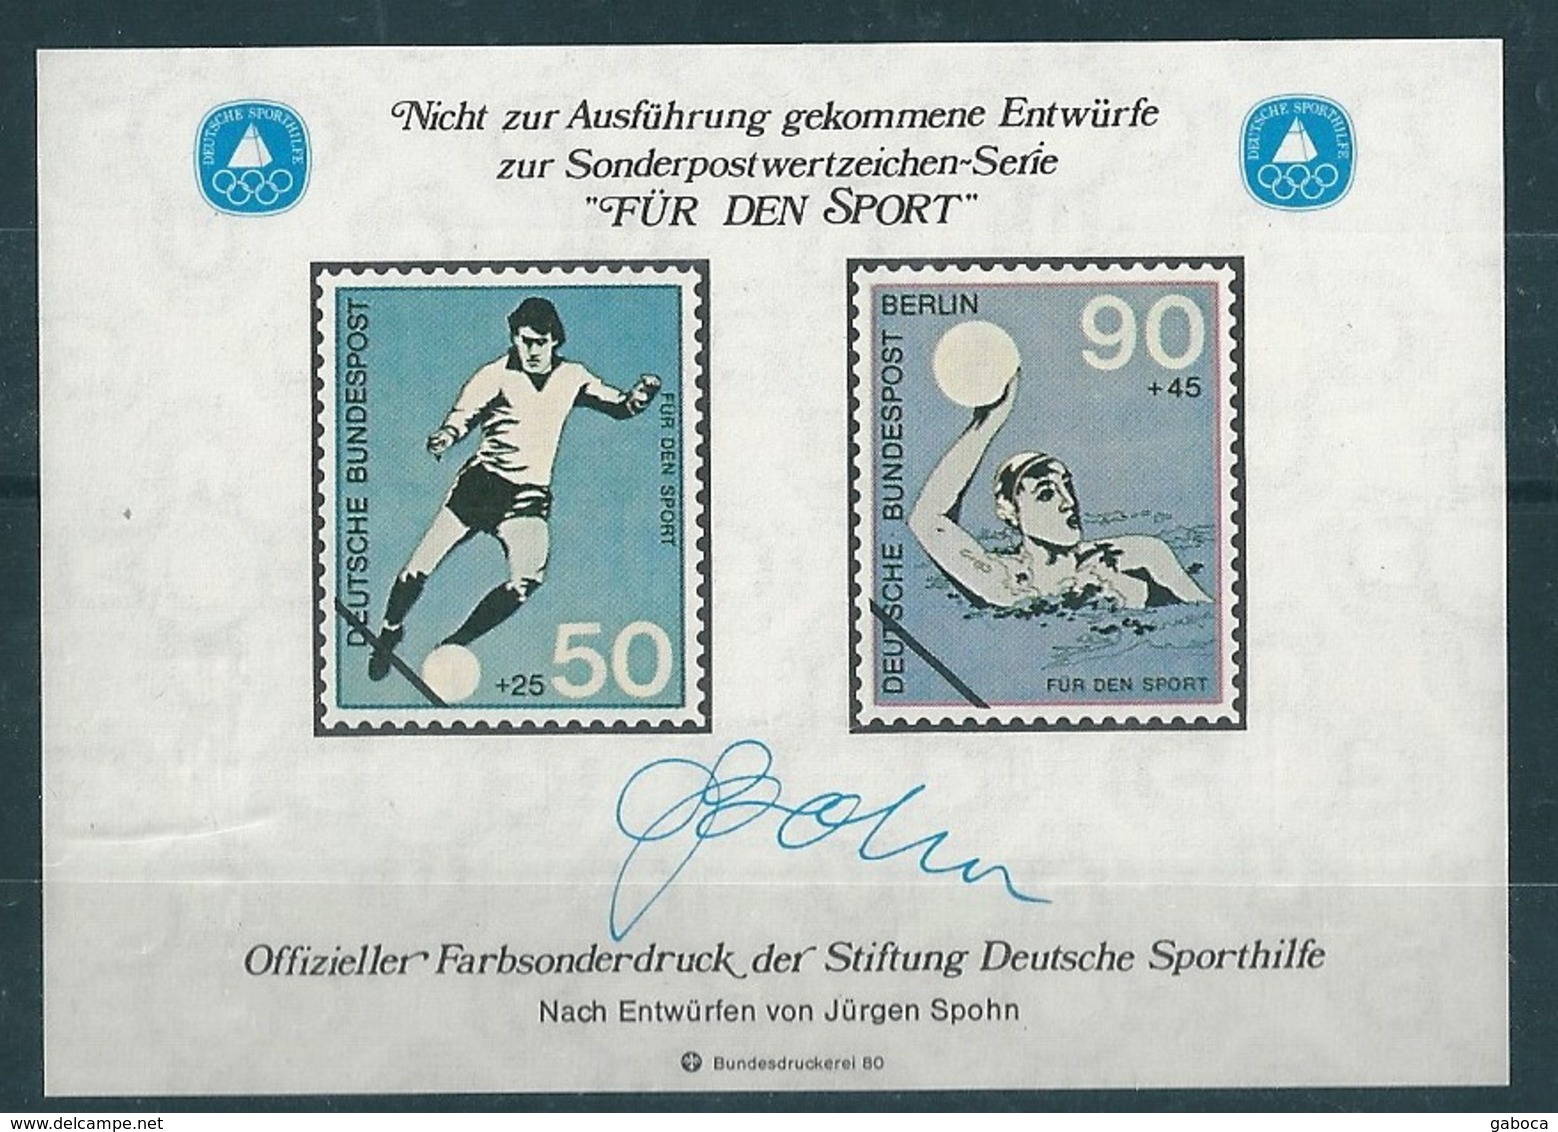 2107 Germany Berlin For Sport Aid Water Polo Football Soccer Official Special Colour Print 3xS/S MNH Lot#99 - Water-Polo